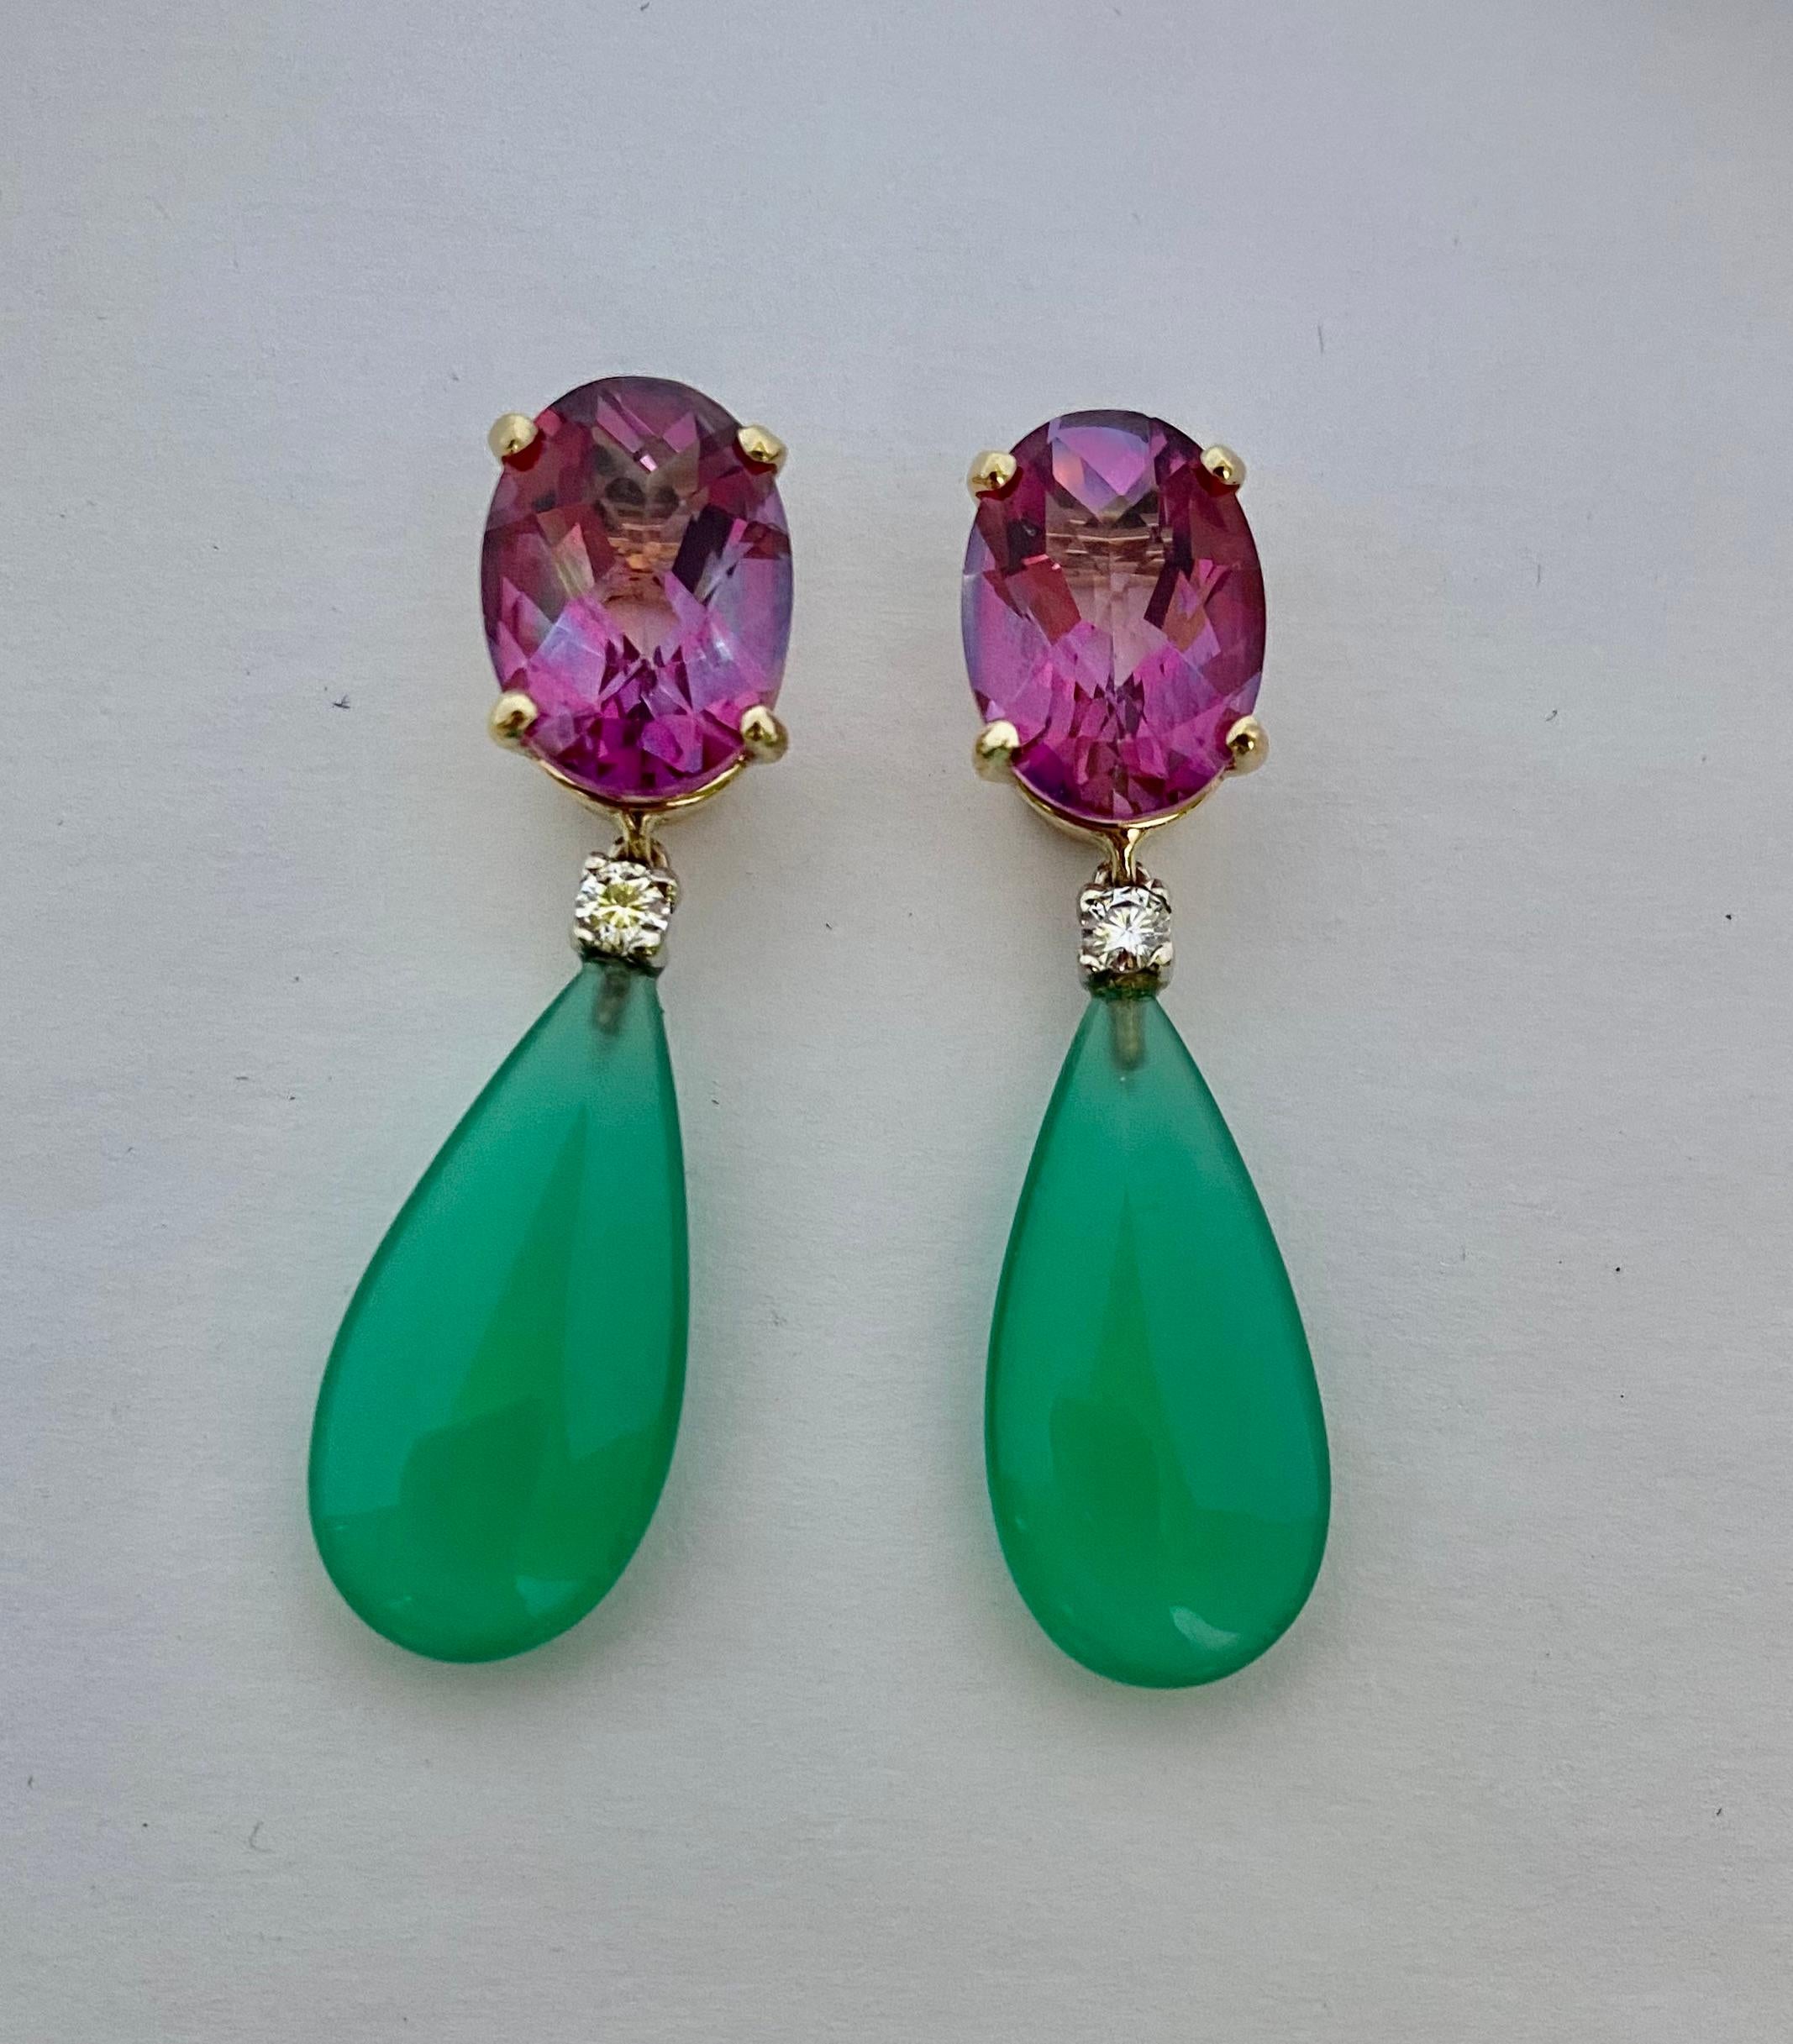 Pink topaz and green onyx in a candy colored combination are featured in these playful dangle earrings.  The oval topaz are faceted in a flashy checkerboard cut.  The gems are well cut and polished.  The drops are fashioned from green onyx.  They